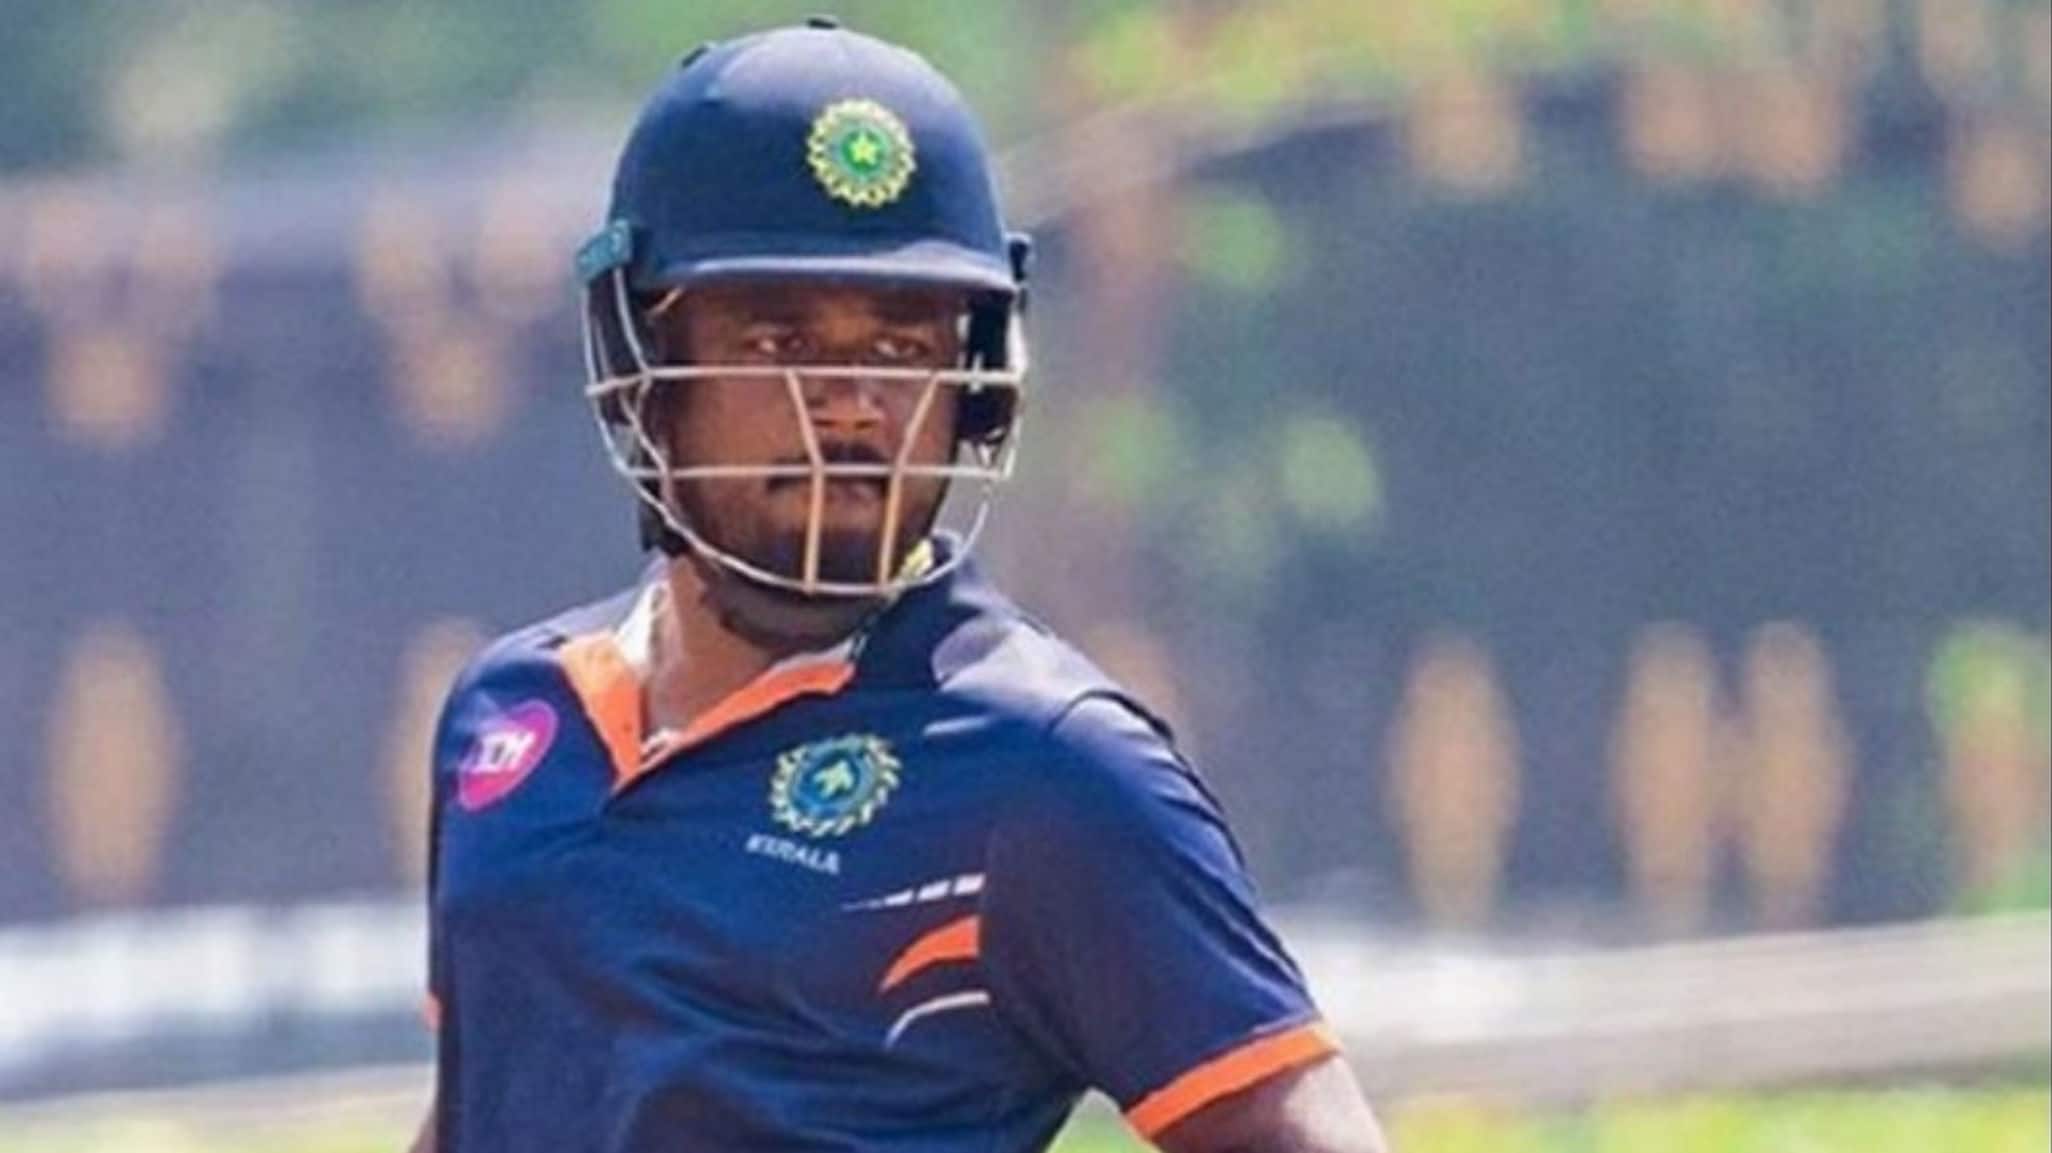 Sanju Samson Lеads Kerala's Charge With Outstanding Century, But In A Losing Cause